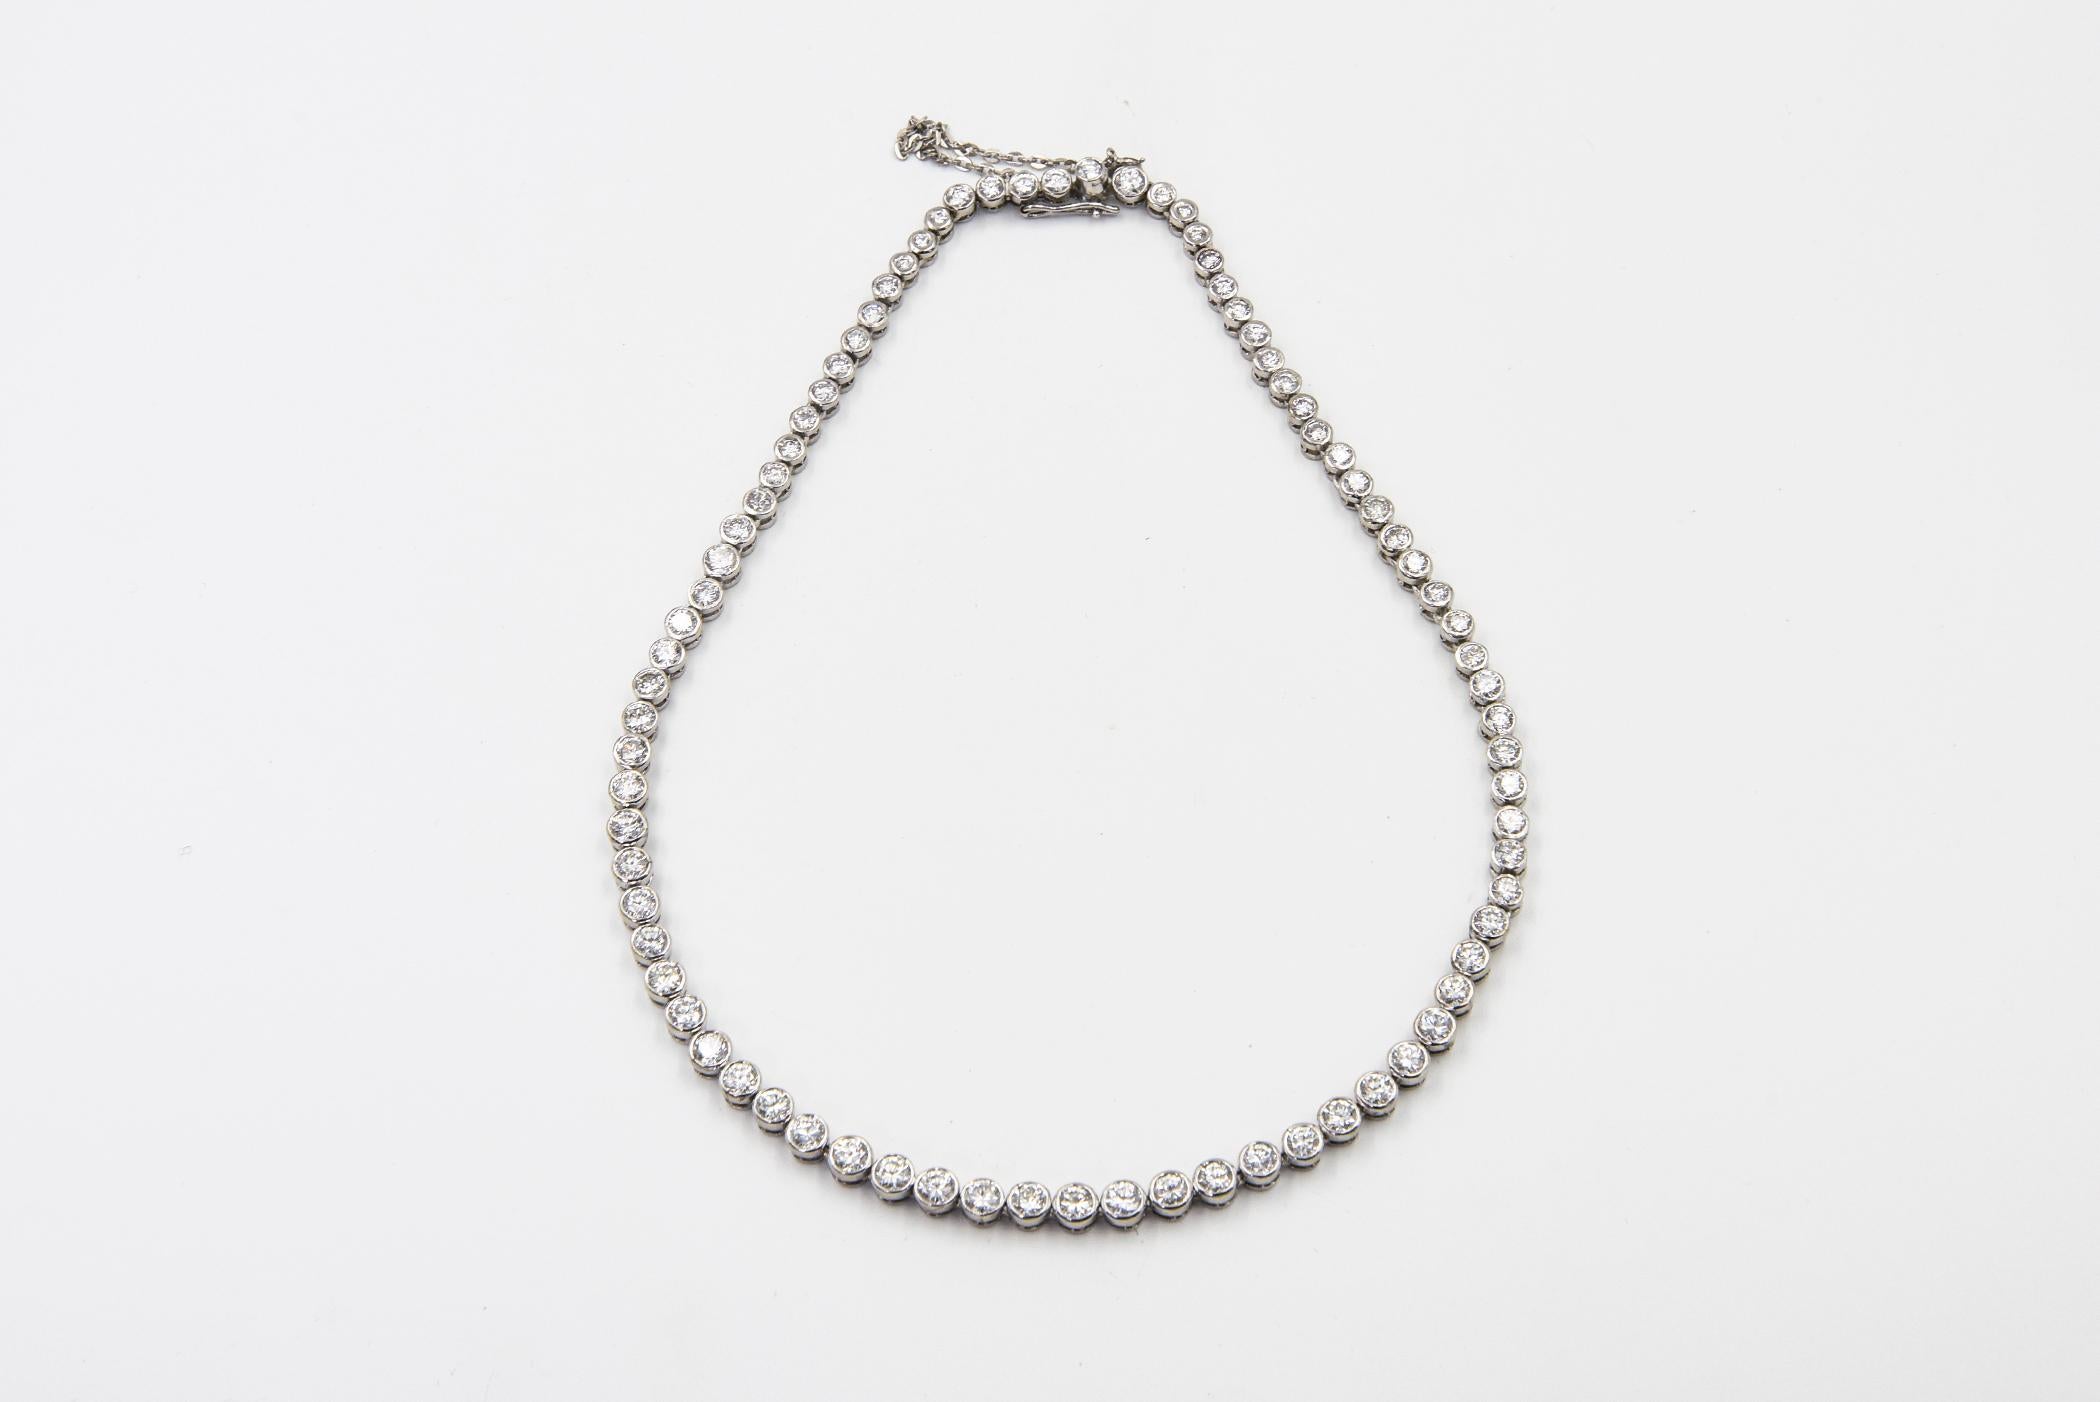 Graduated natural diamond tennis necklace mounted in 14k white gold.  There are 80 bezel set diamonds. It has an approximate total weight of 9 carats in diamonds.  The clasp is a push button with a safety chain.  This necklace is only shorter than